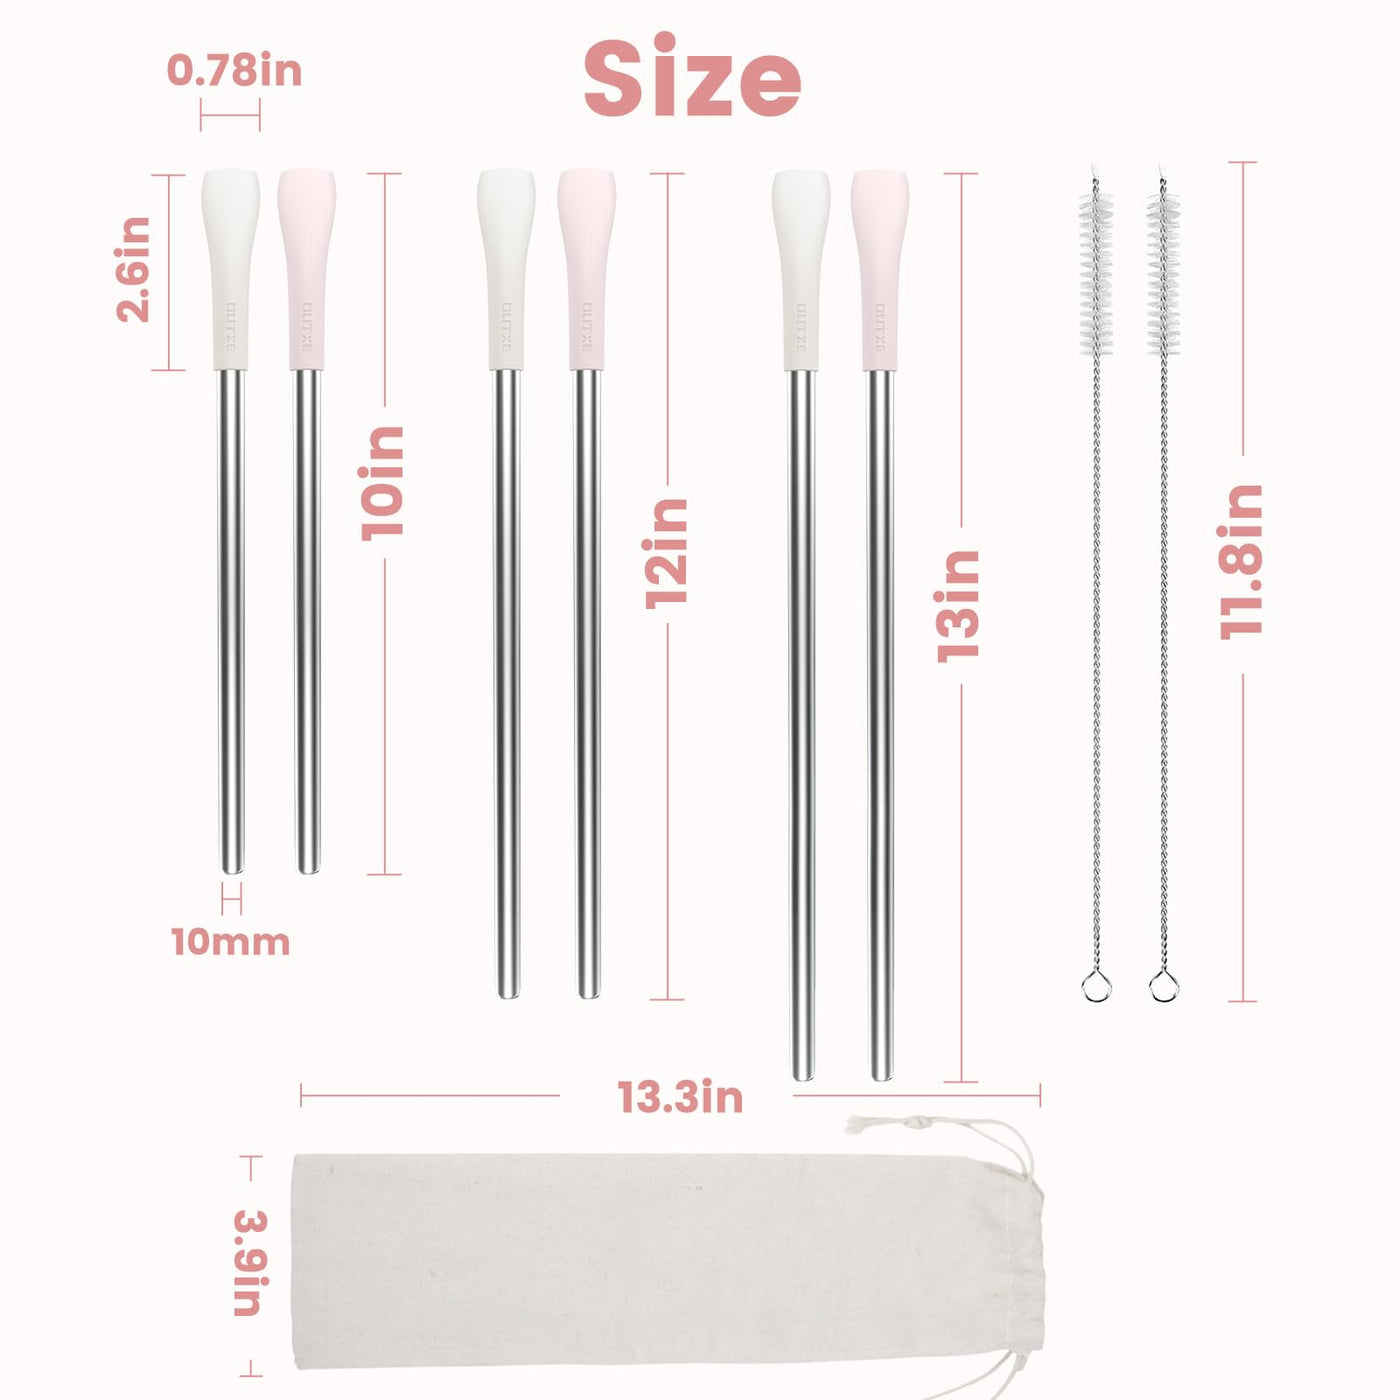 OUTXE Anti Wrinkle Straw 6 Pcs, Stainless Steel Drinking Straw for Stanley 40oz 30oz Tumbler, Reusable Wrinkle Free Long Metal Straw for Lip with Cleaning Brush and Carrying Bag